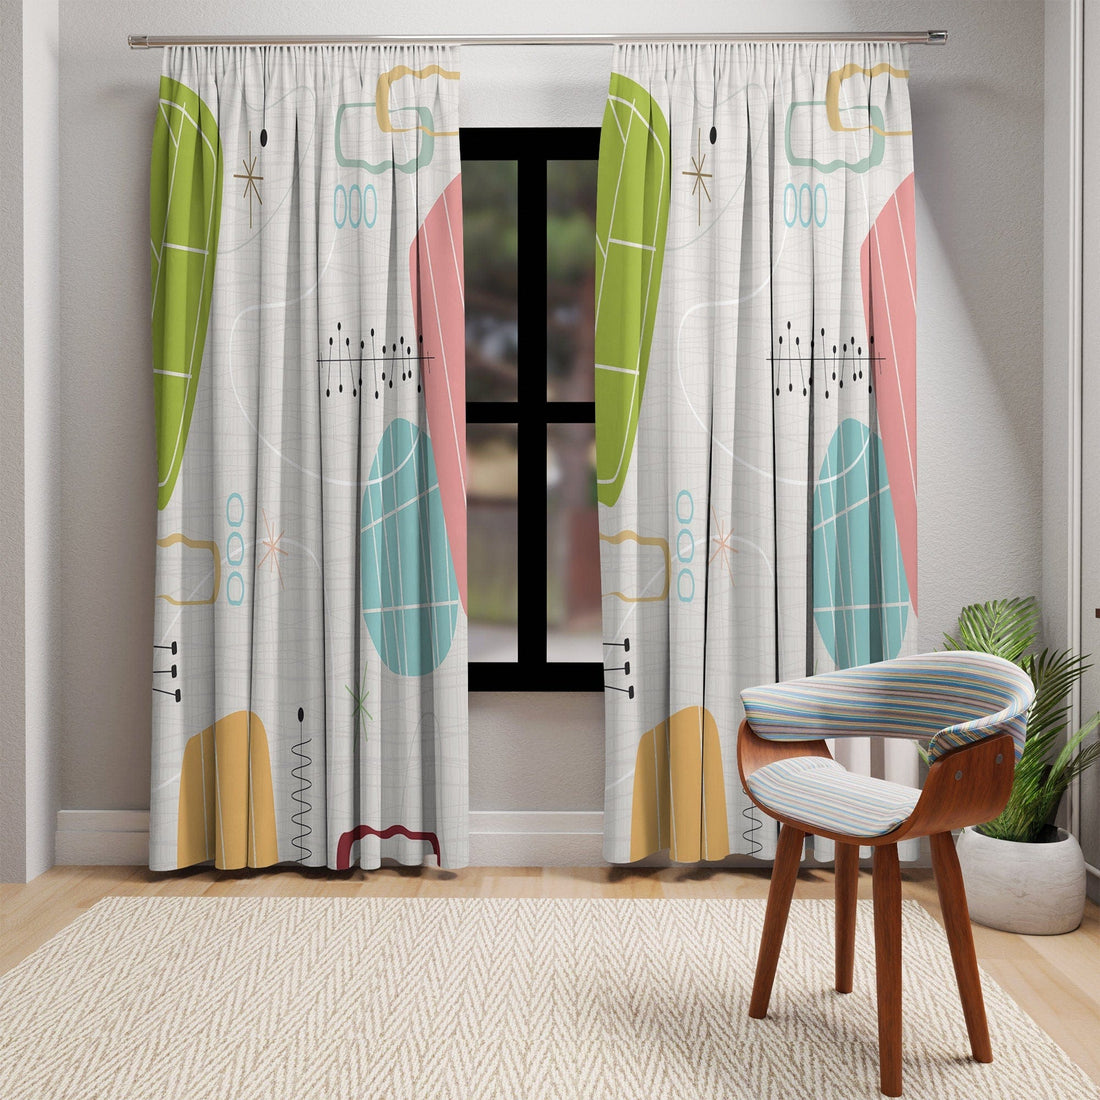 Kate McEnroe New York 1950s Mid Century Modern Abstract Window Curtains in Retro Teal, Lime Green, Coral, Light Gray Window Curtains